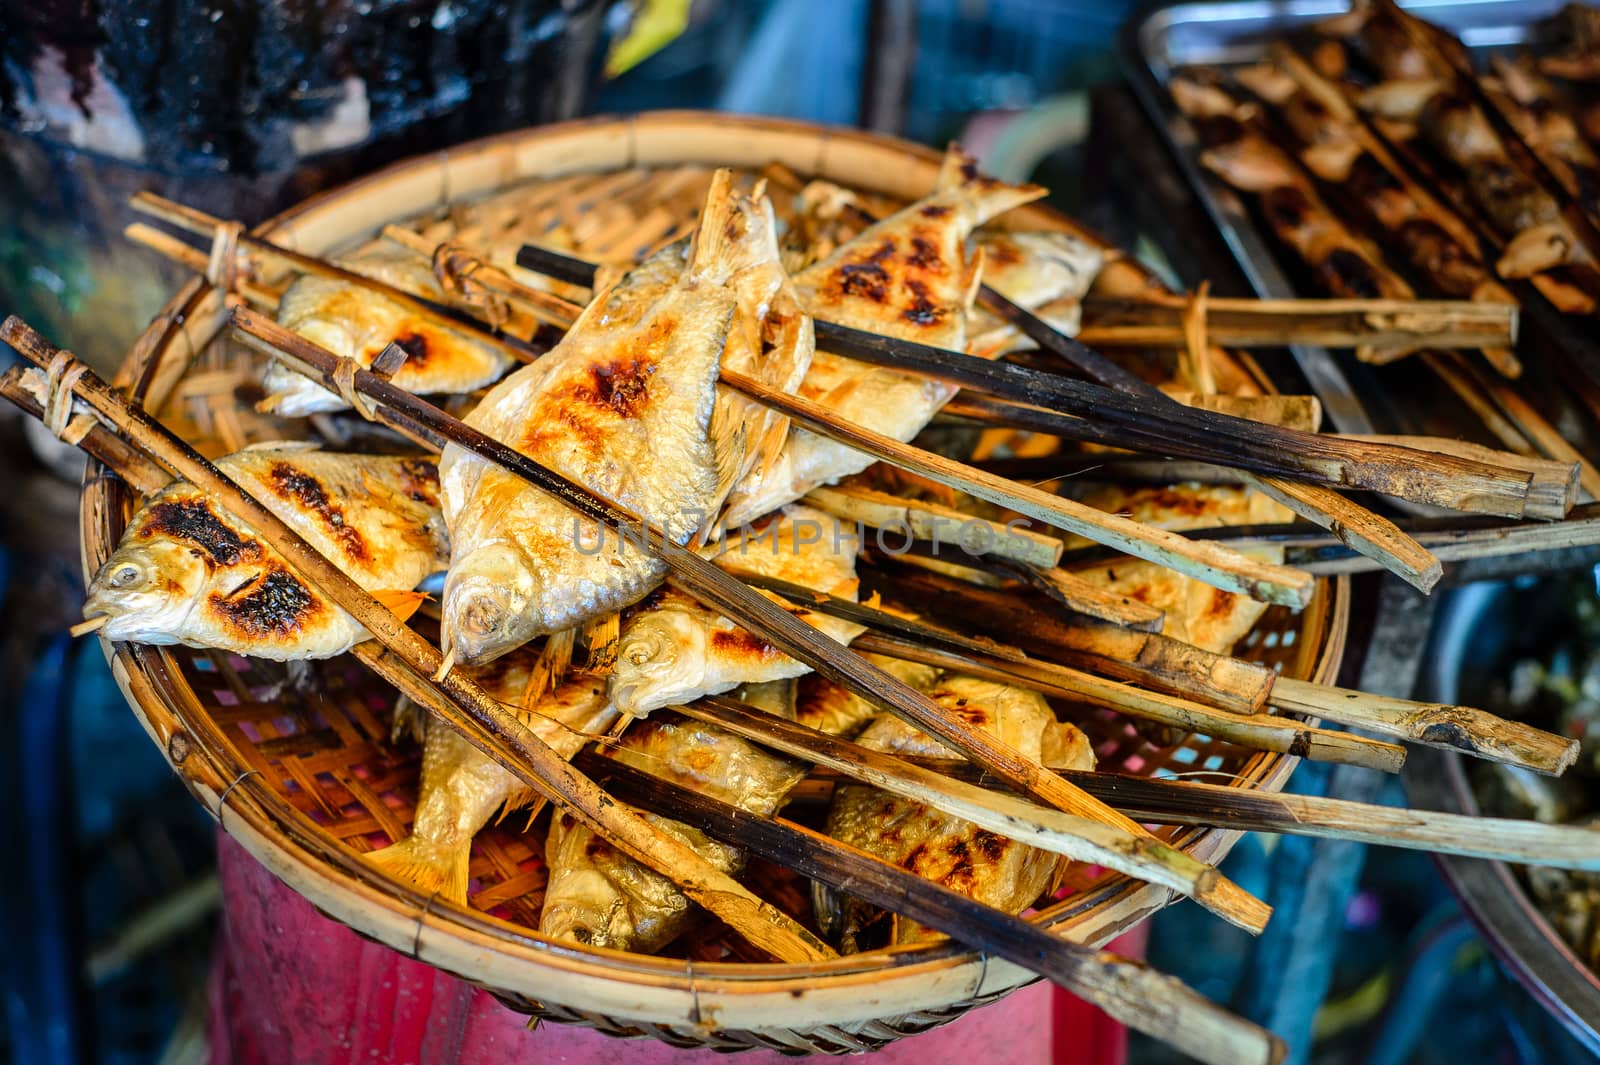 Grilled fish was selling at Phsar Thmei - Phnom Penh market